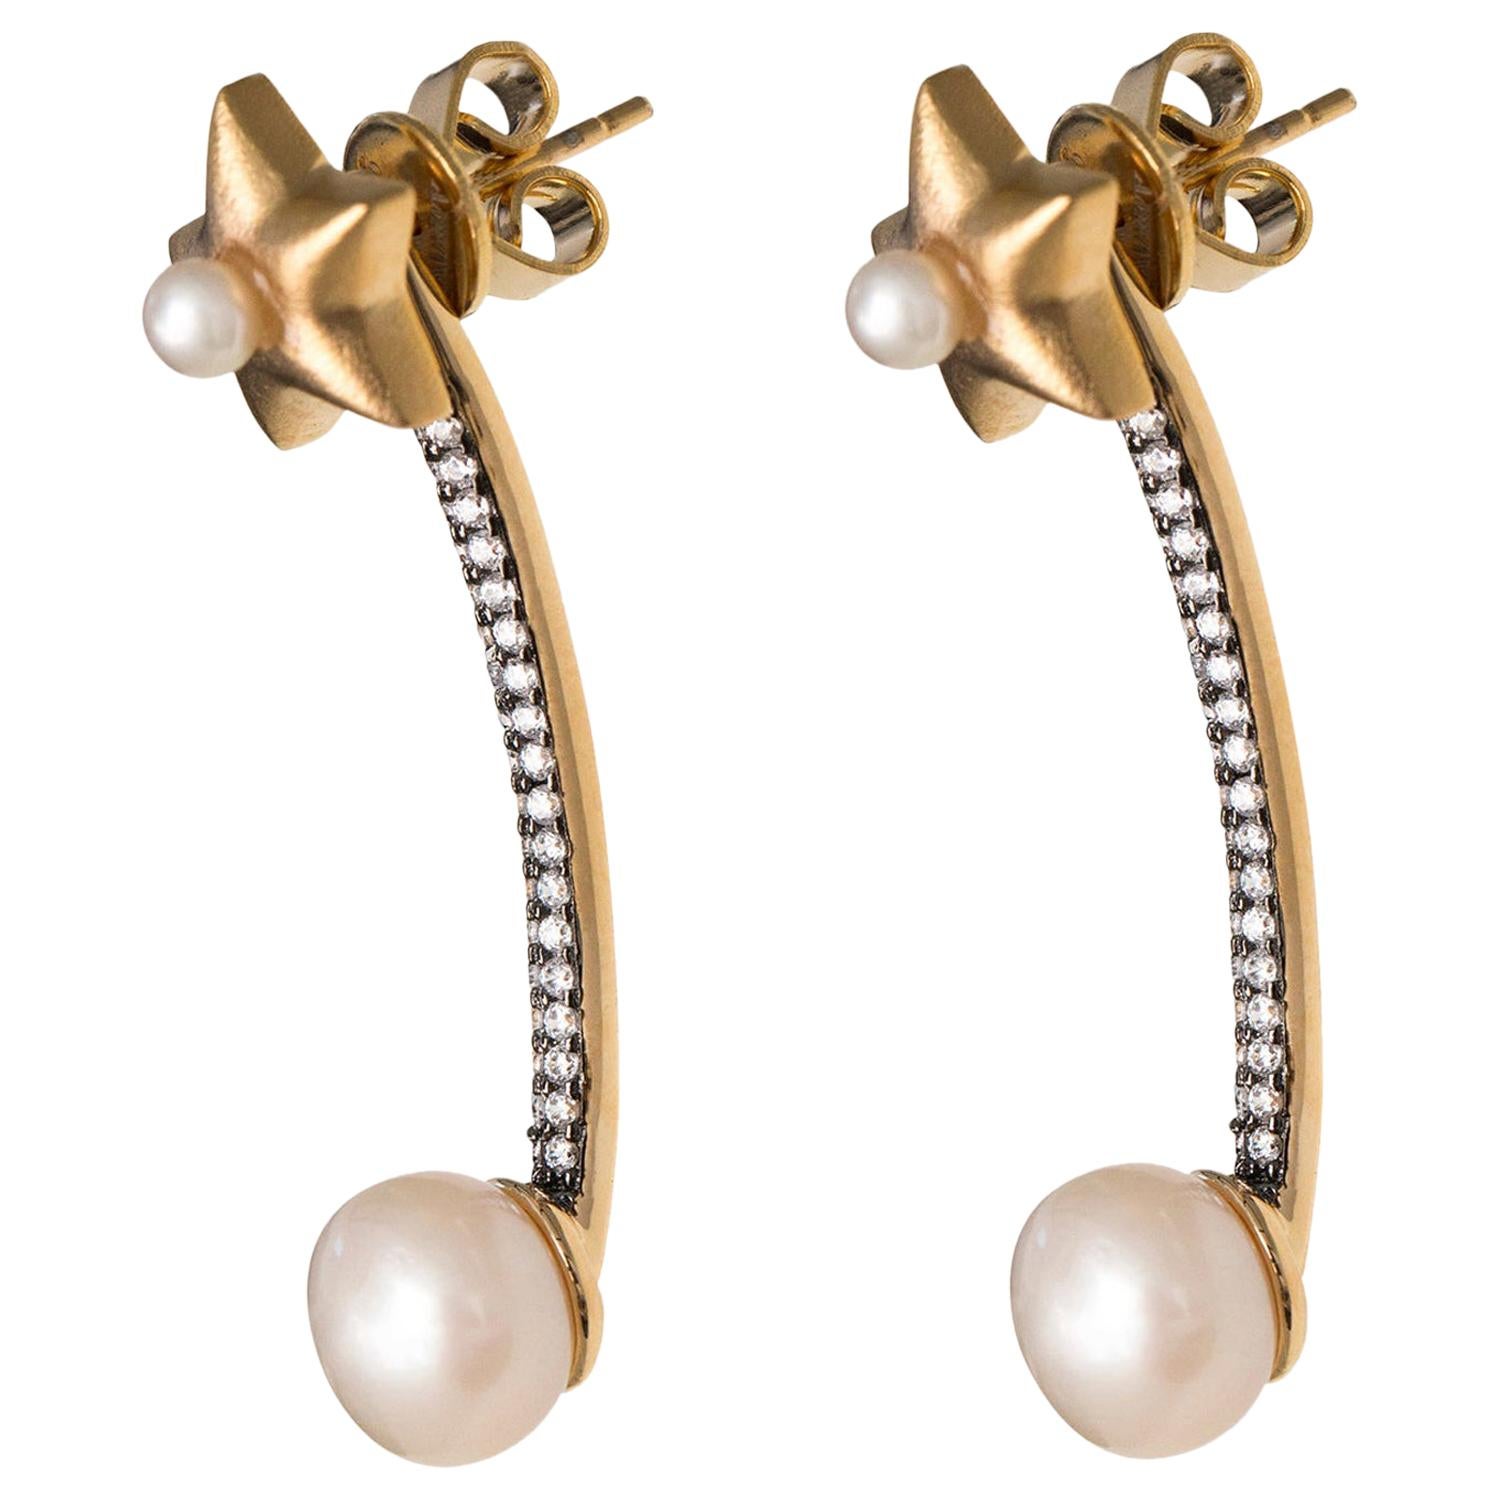 Ammanii Star Jacket Earrings with Pearls and Zircon in Vermeil Gold